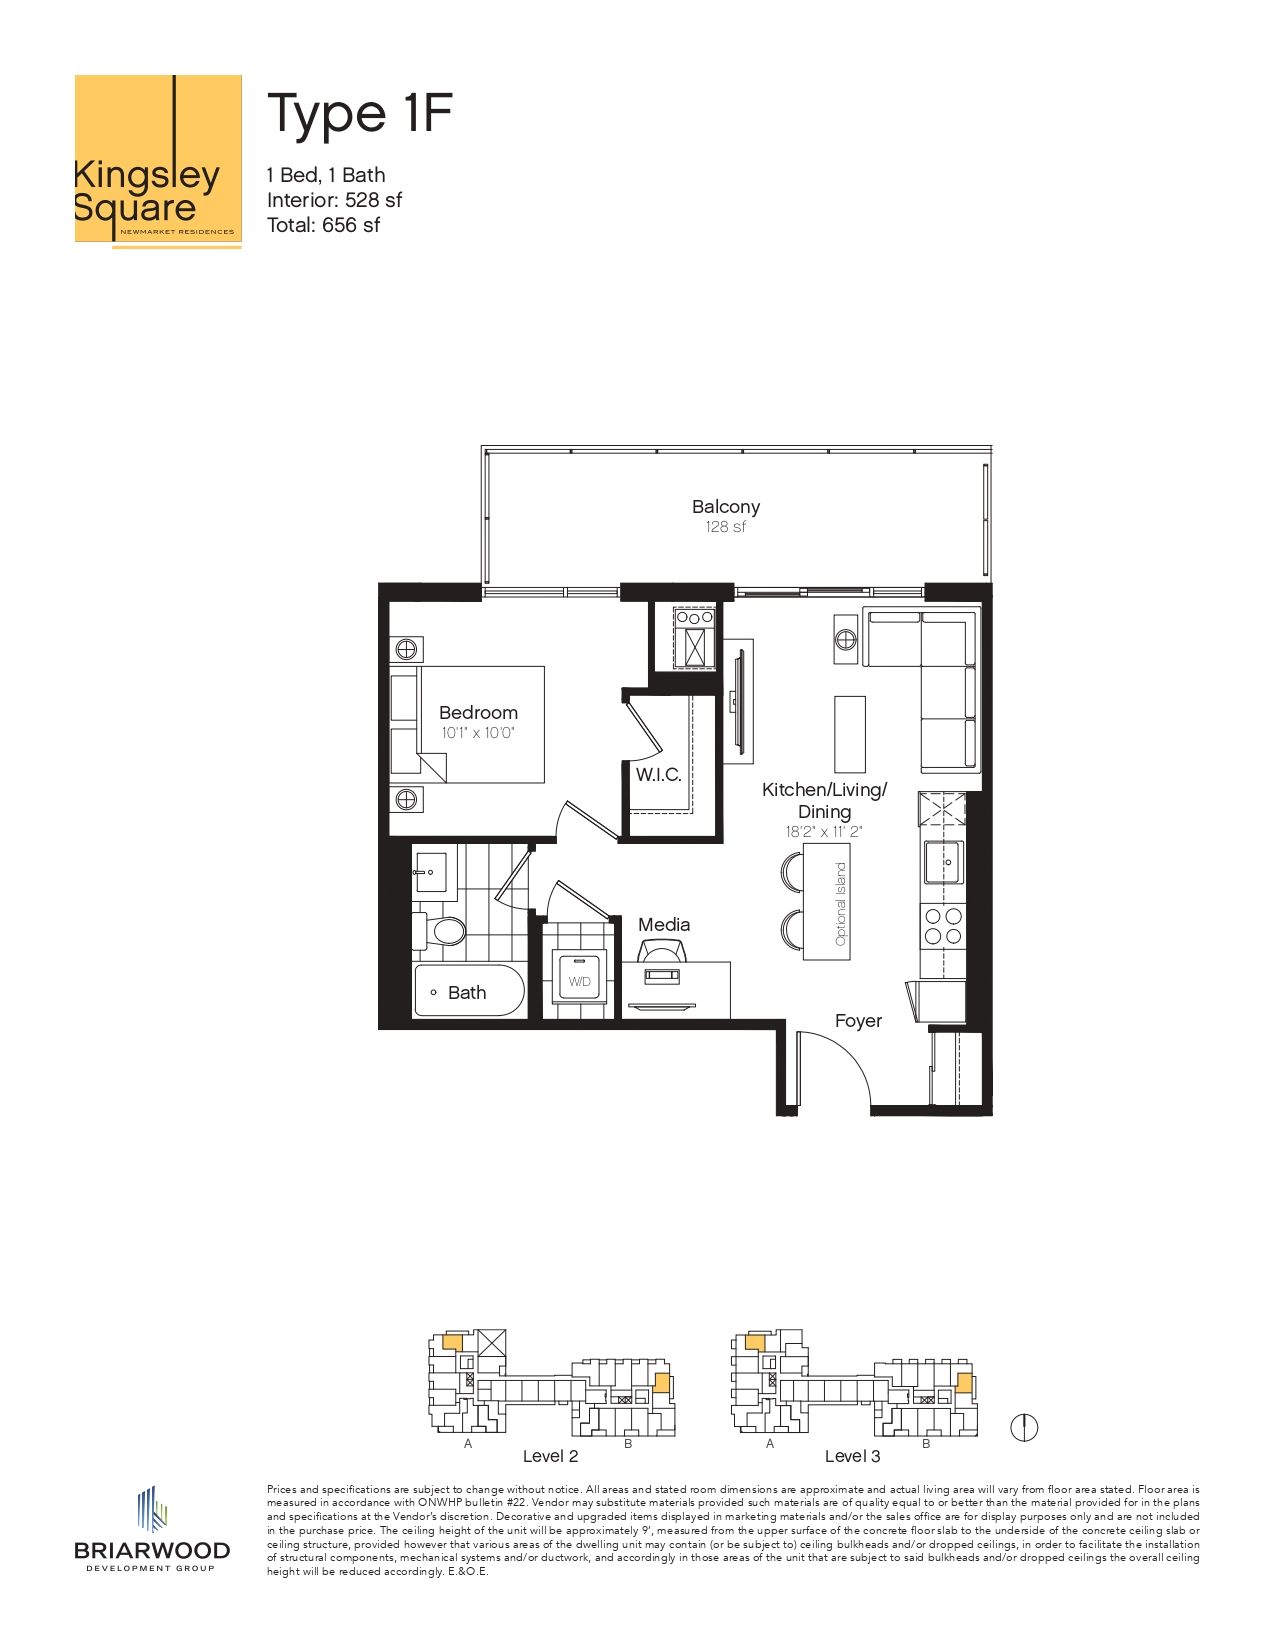 1F Floor Plan of Kingsley Square Condos with undefined beds